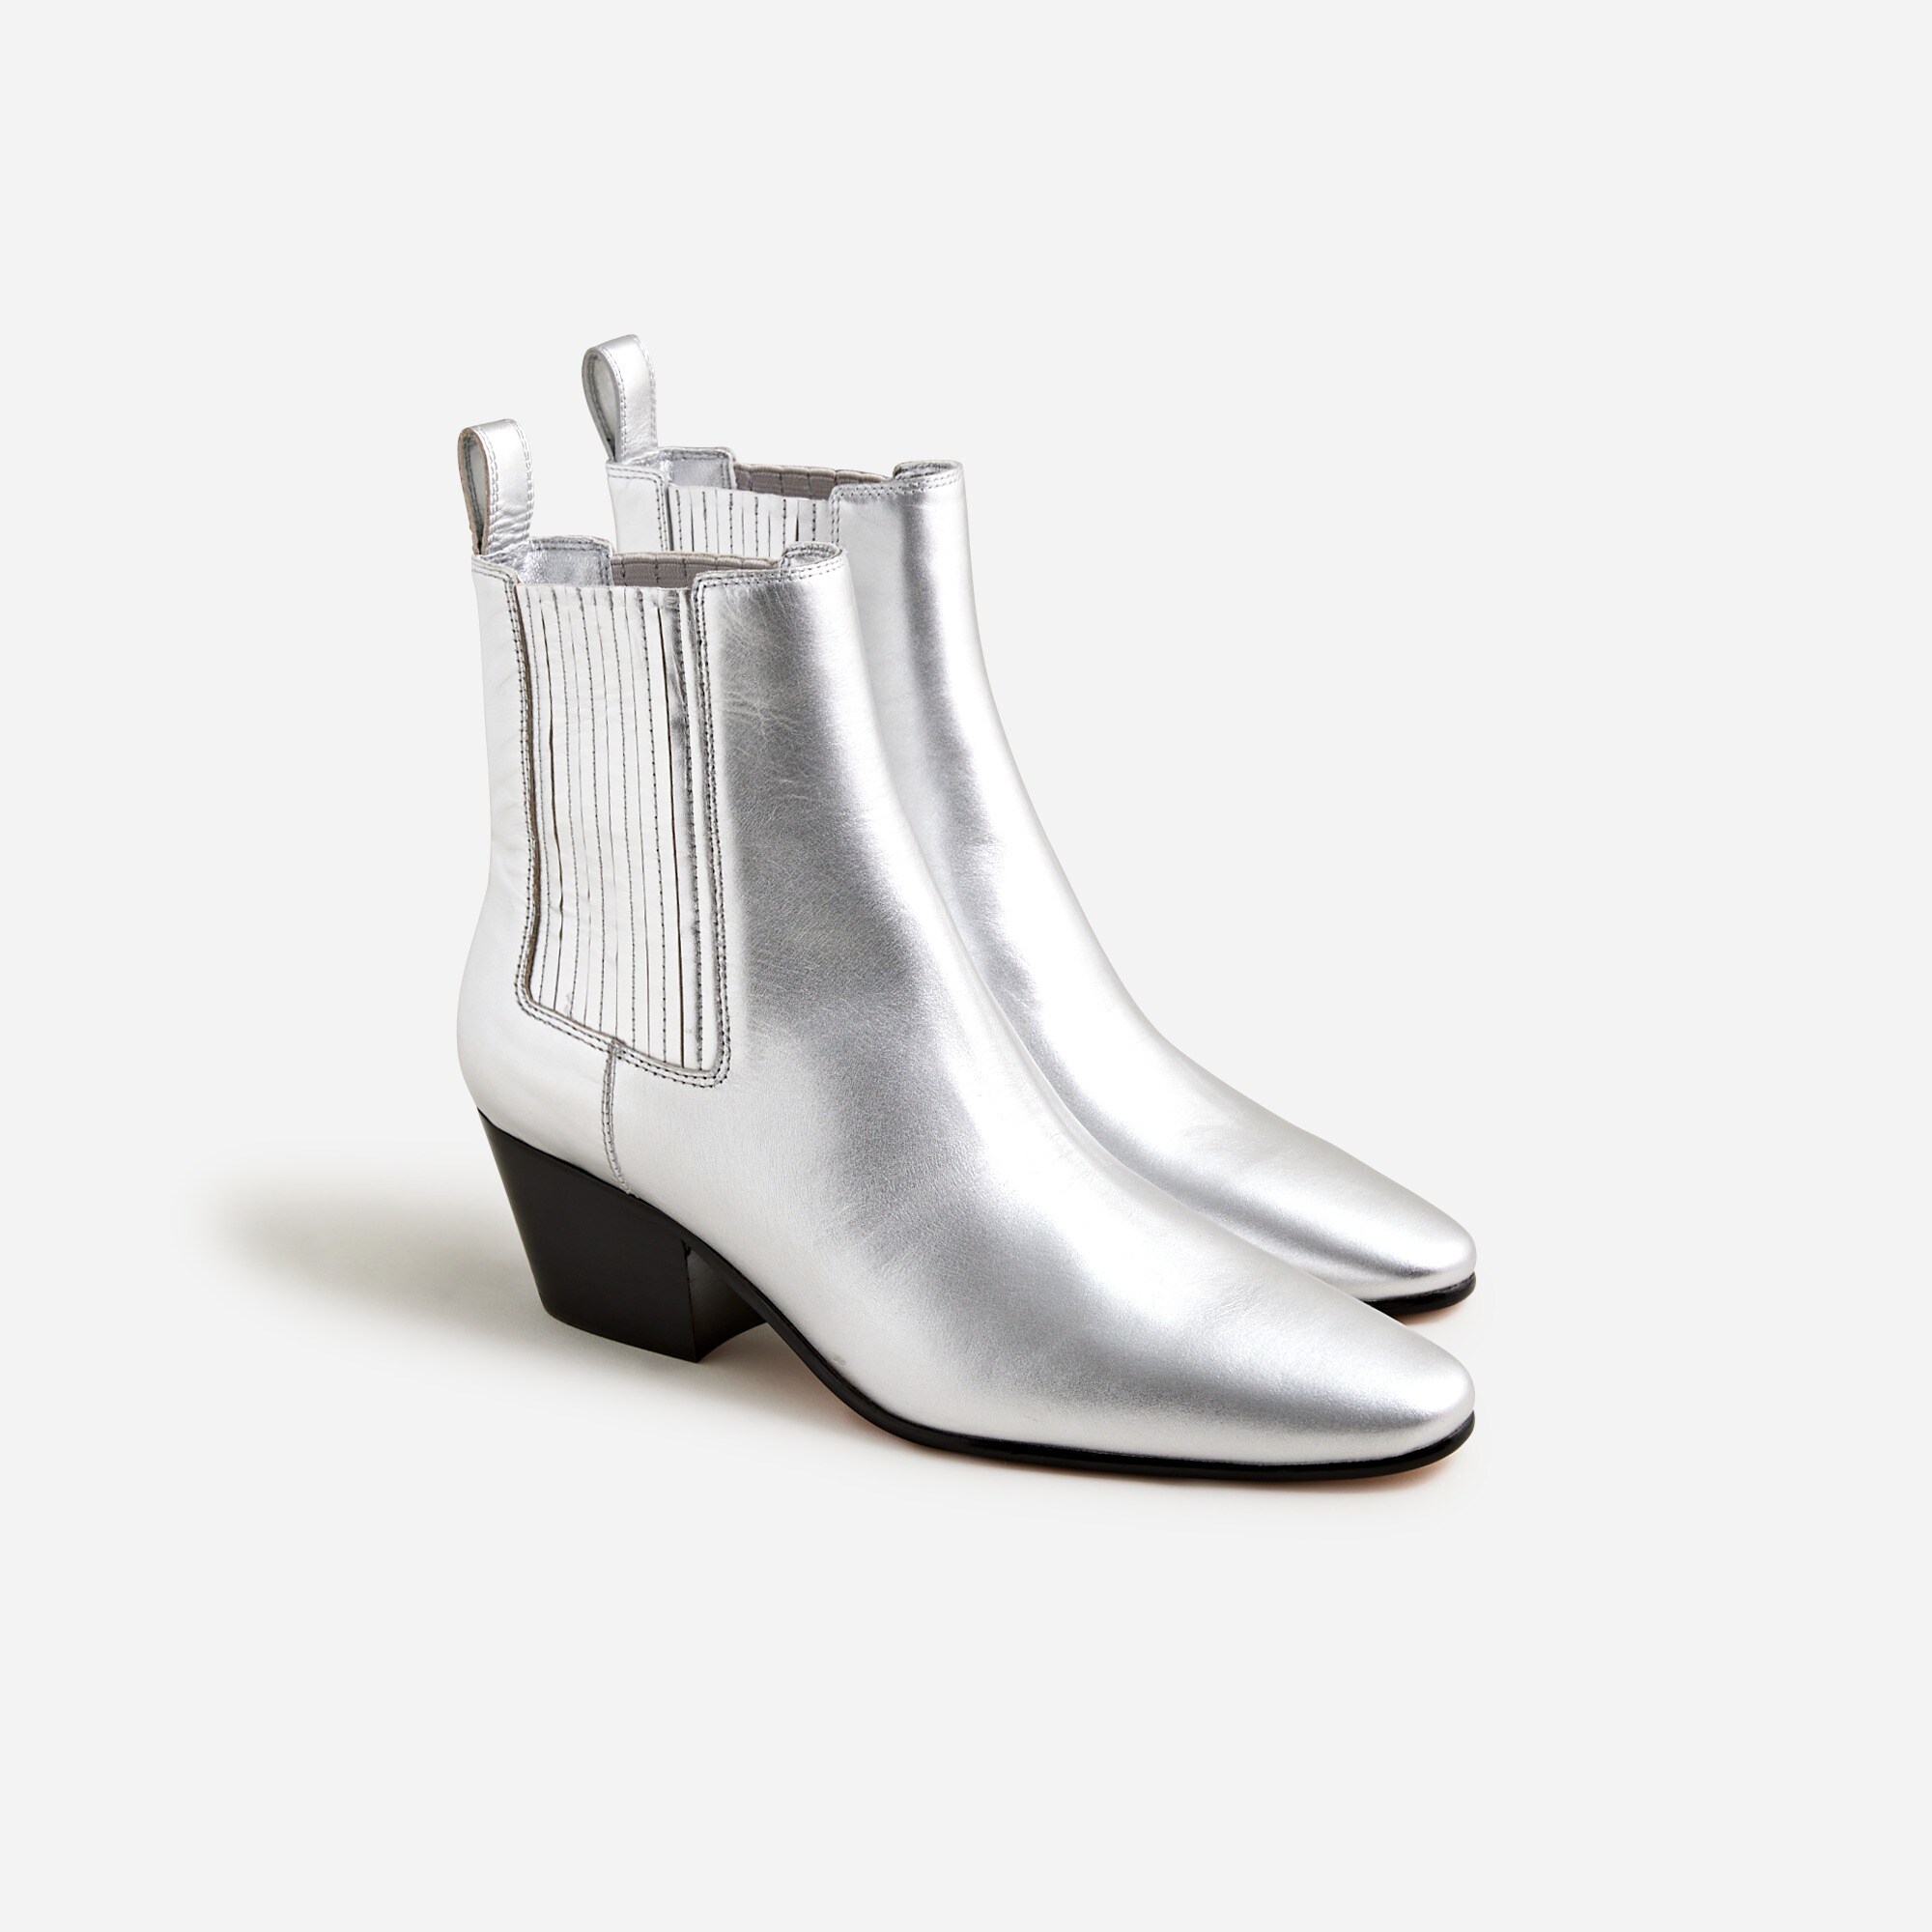  Piper ankle boots in metallic leather